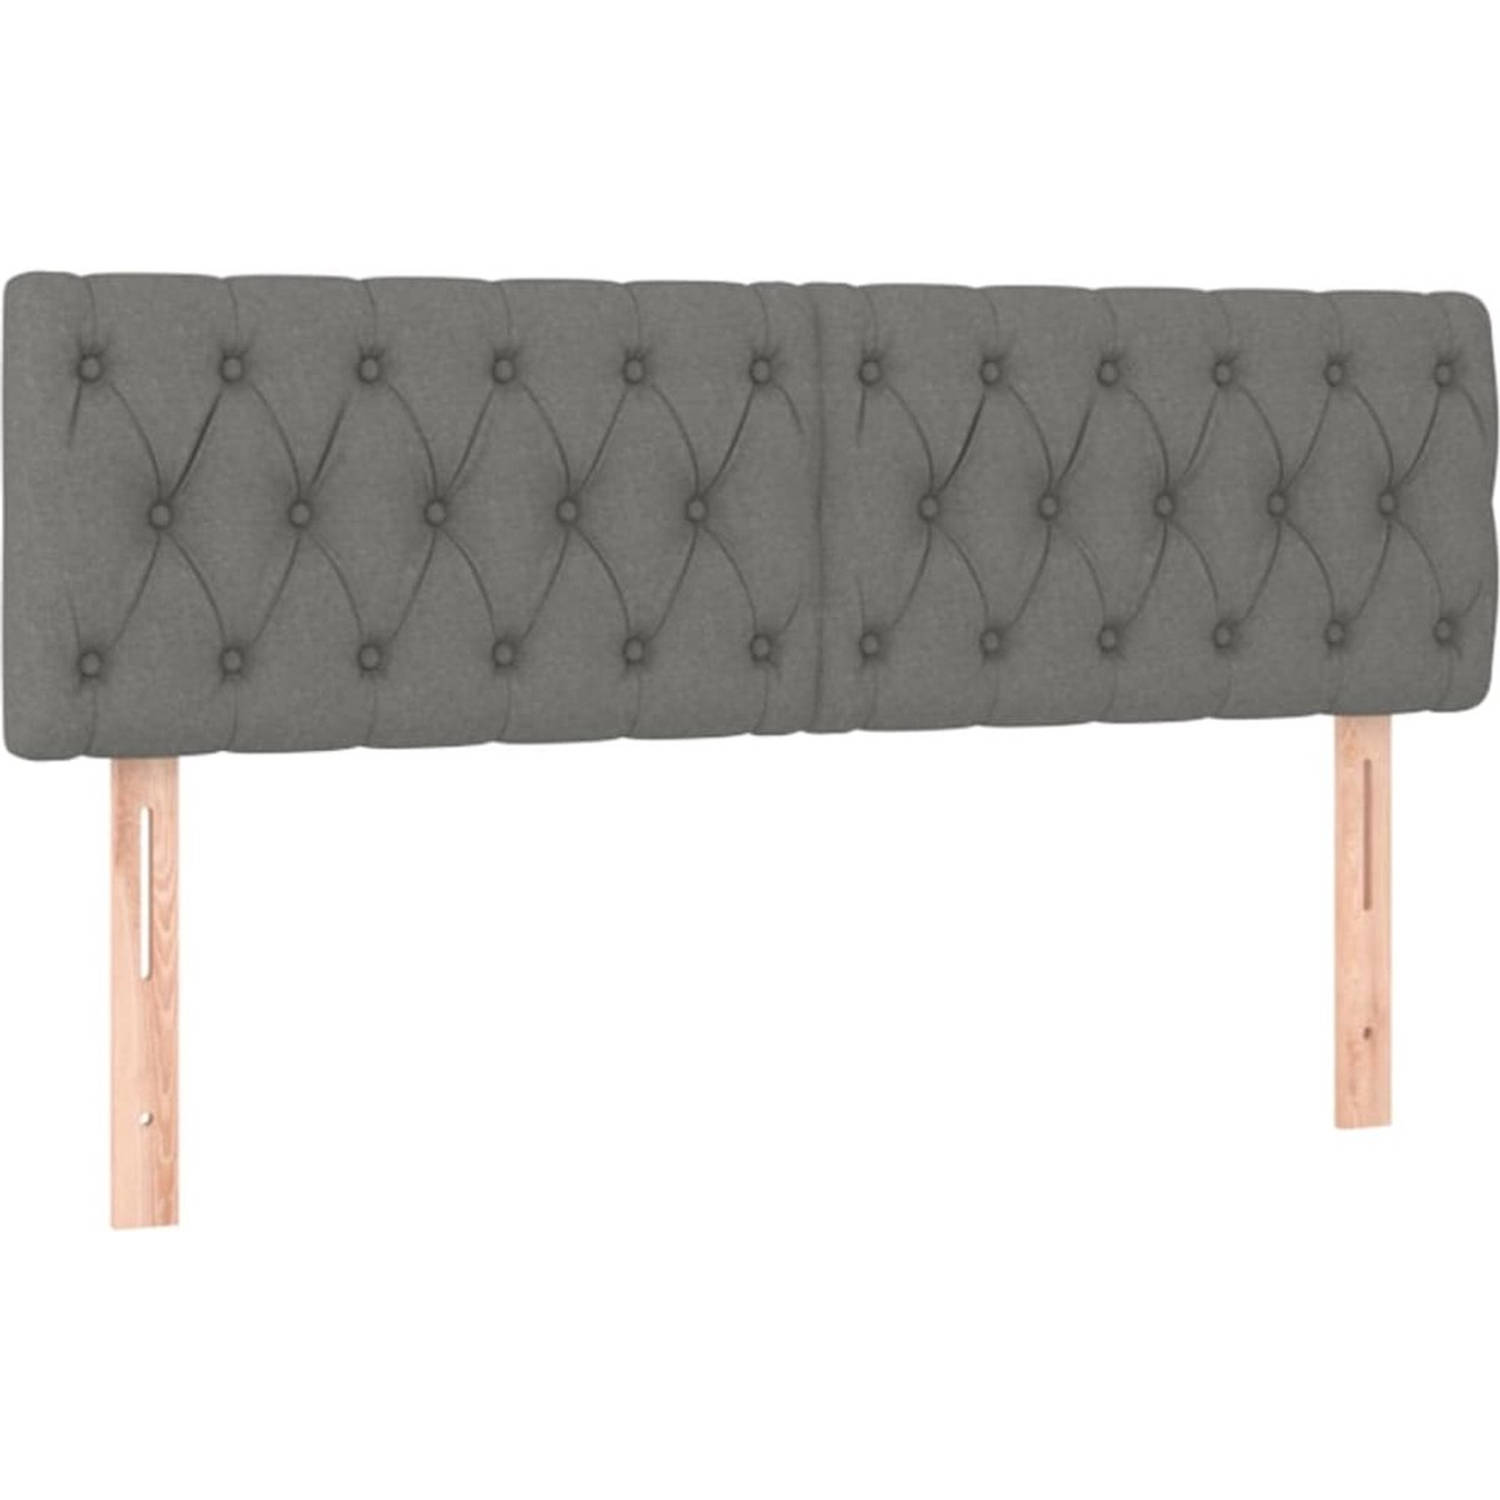 The Living Store Boxspring met matras en LED stof donkergrijs 140x200 cm - Boxspring - Boxsprings - Bed - Slaapmeubel - Boxspringbed - Boxspring Bed - Tweepersoonsbed - Bed Met Mat